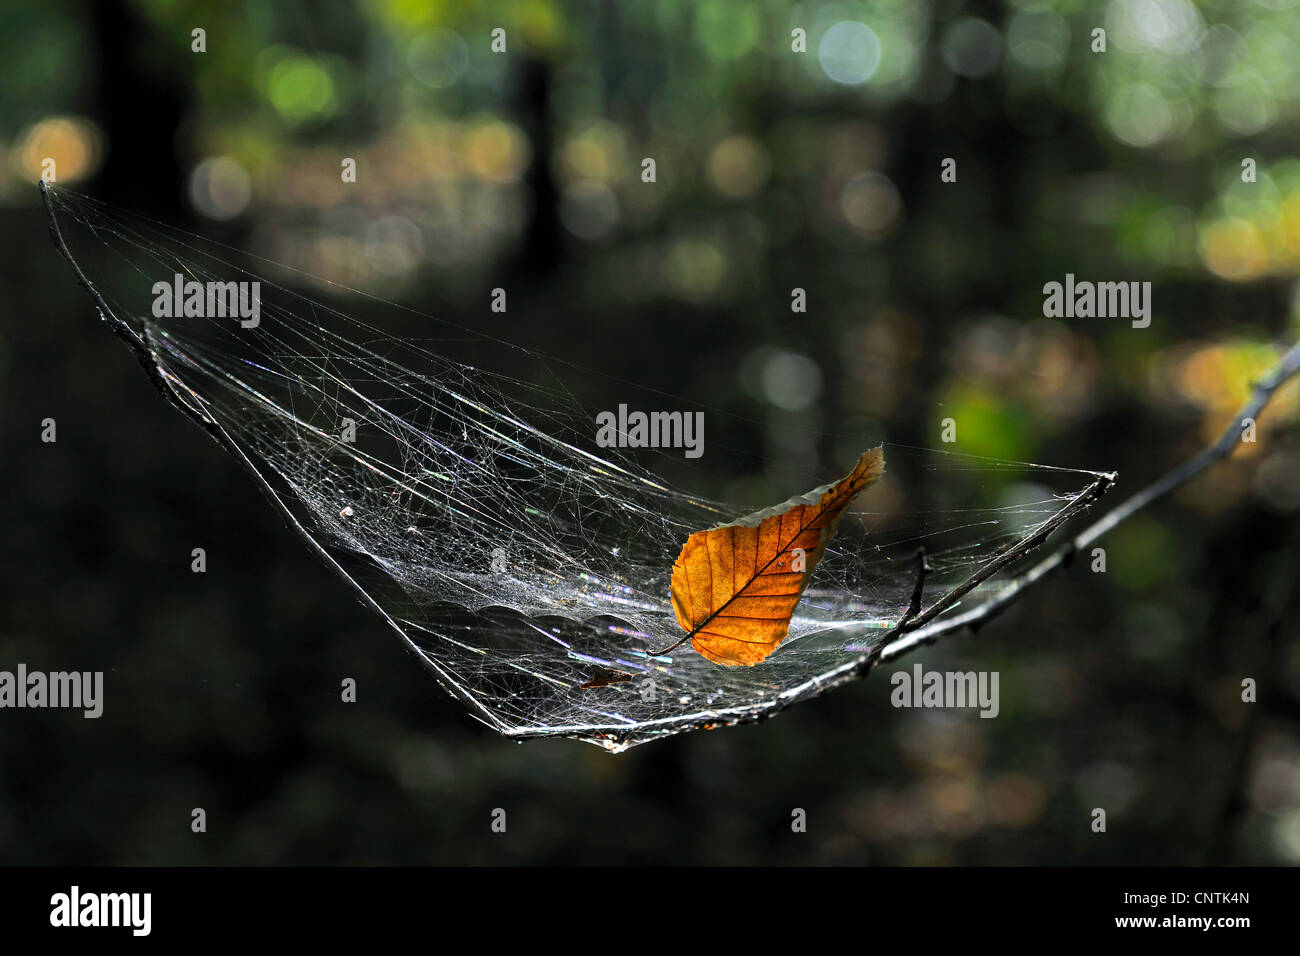 autumn leaf in a spider's web in backlight, Germany Stock Photo